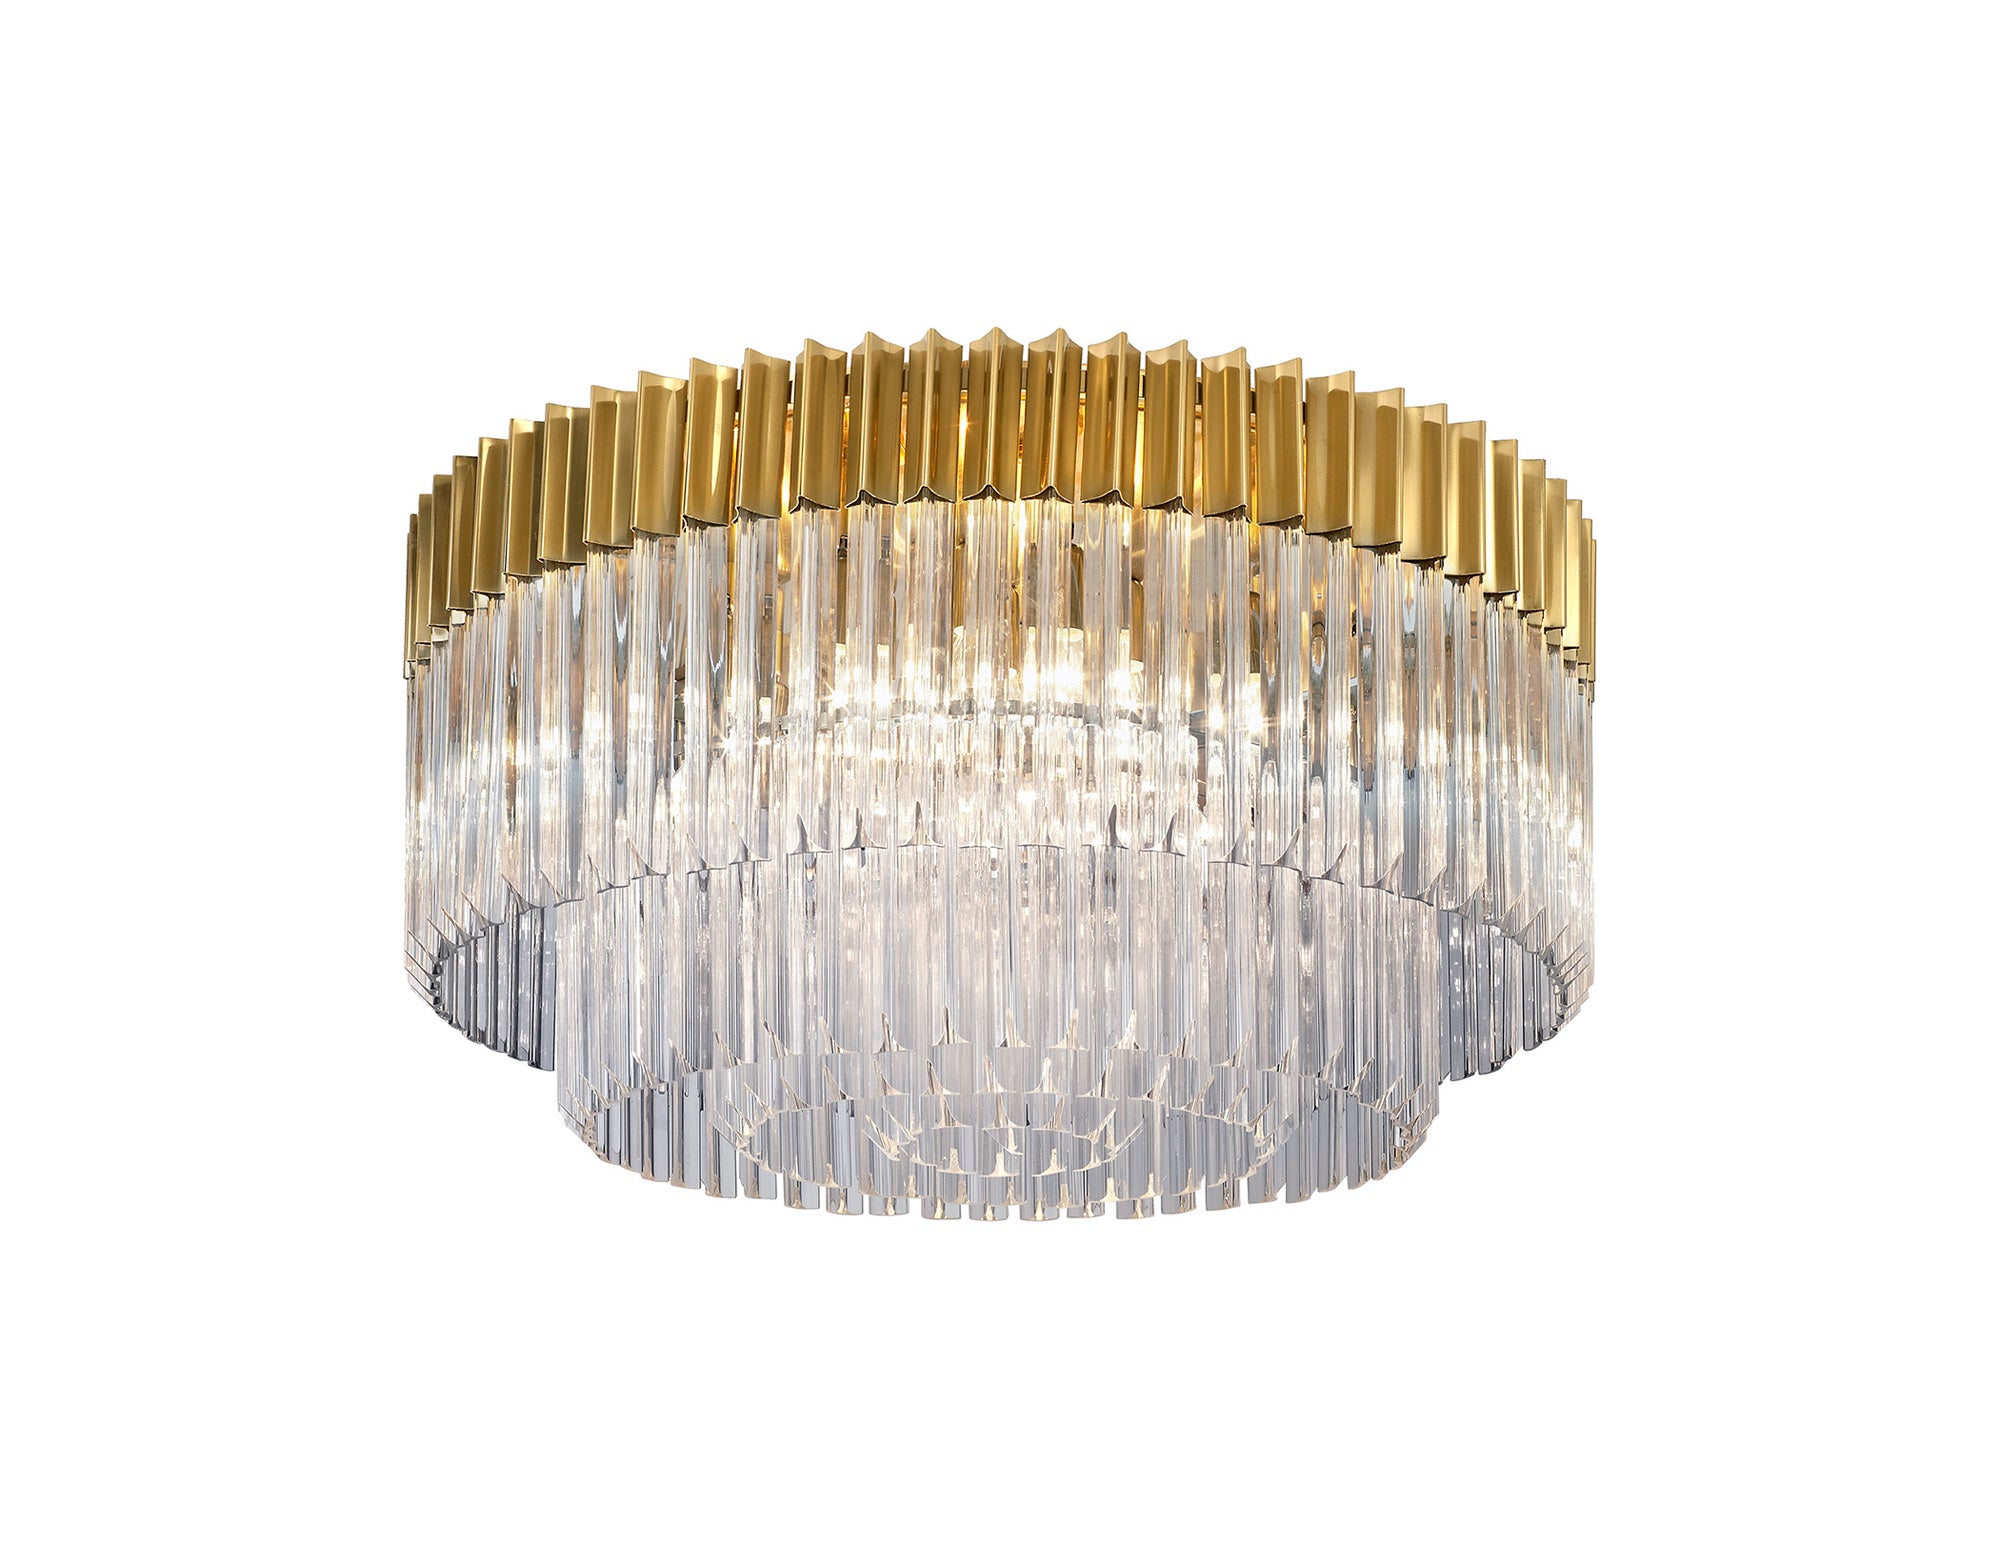 Knightsbridge Ceiling Round 12 Light E14, Brass/Clear Glass, Item Weight: 28.4kg - LO182293